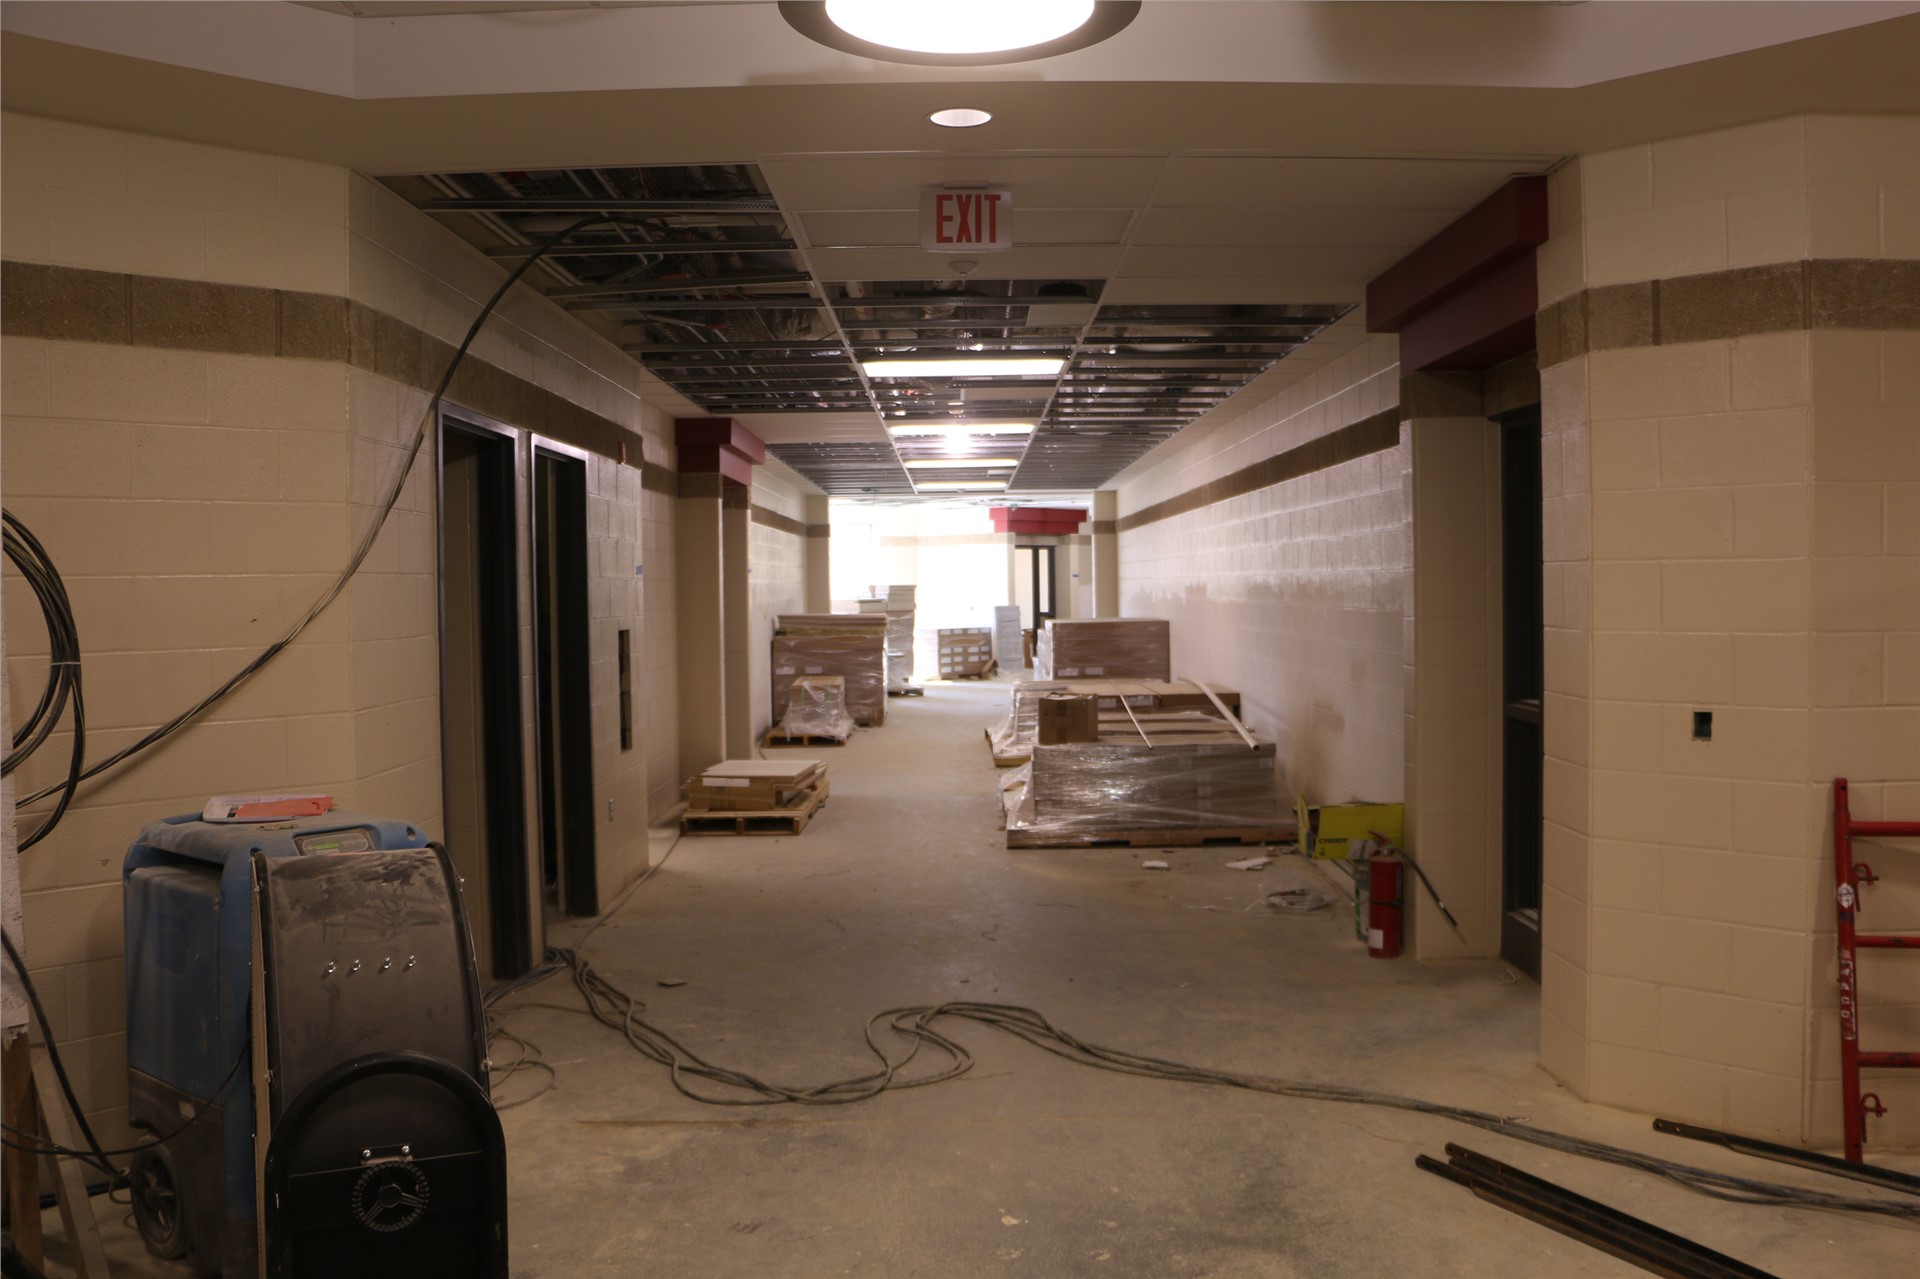 1st floor of the West Academic Wing